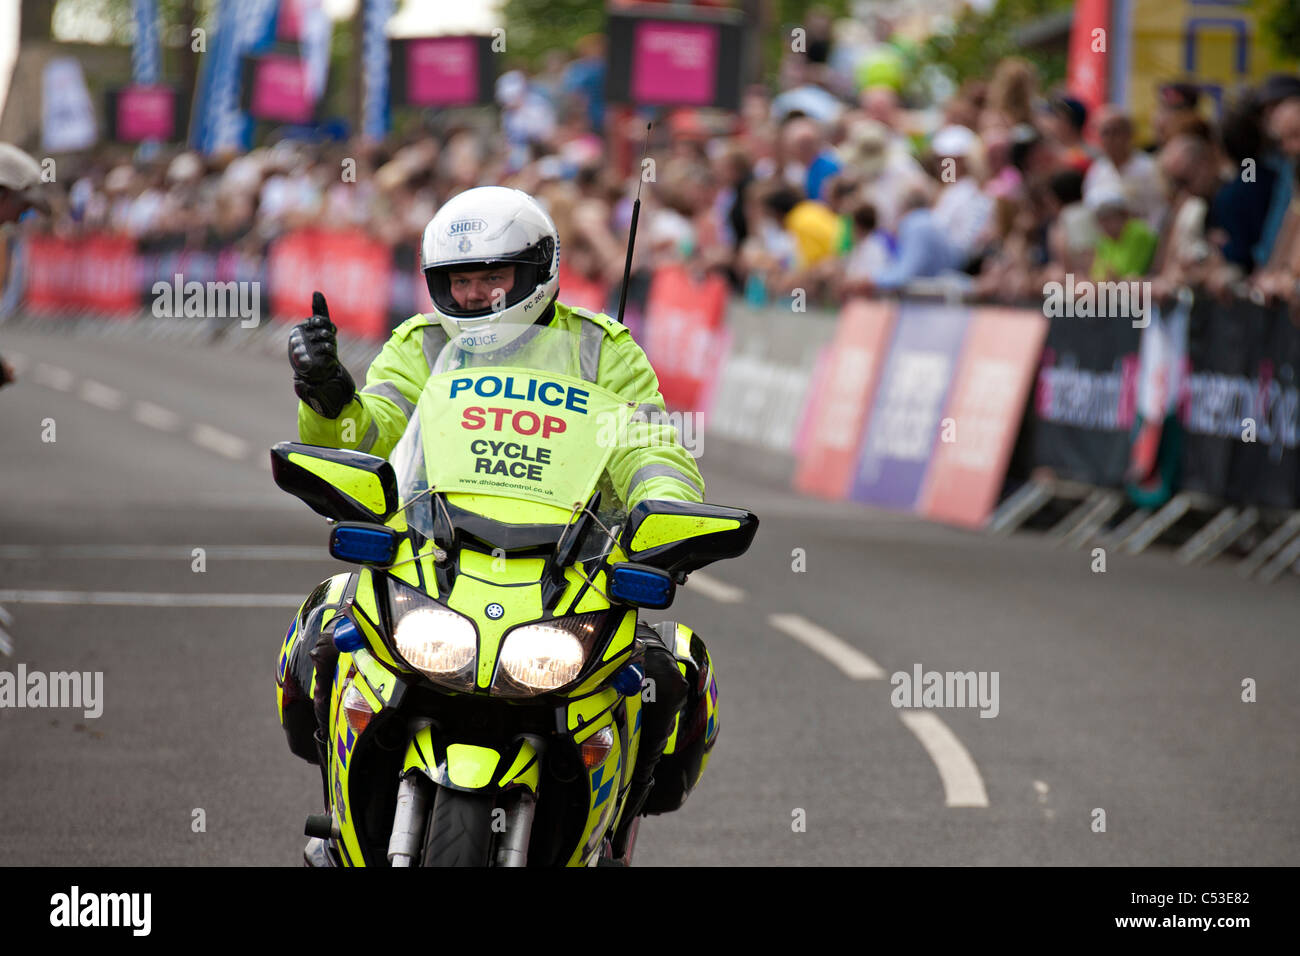 A policeman gives a thumbs up during the 2011 British National Road Racing championships Stock Photo